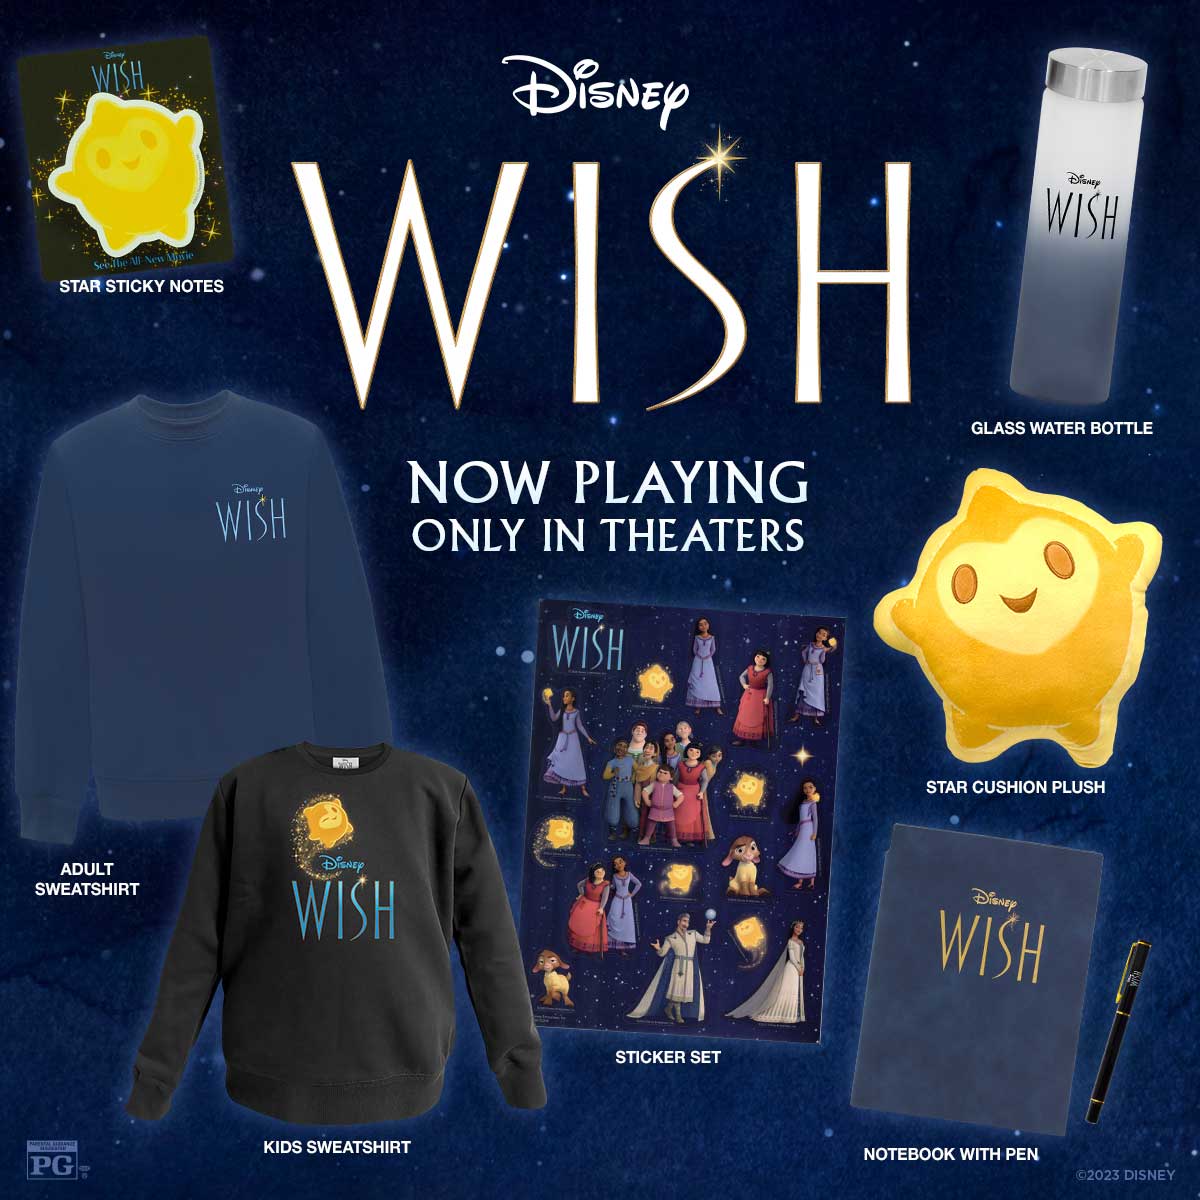 Enter to win a WISH prize pack!